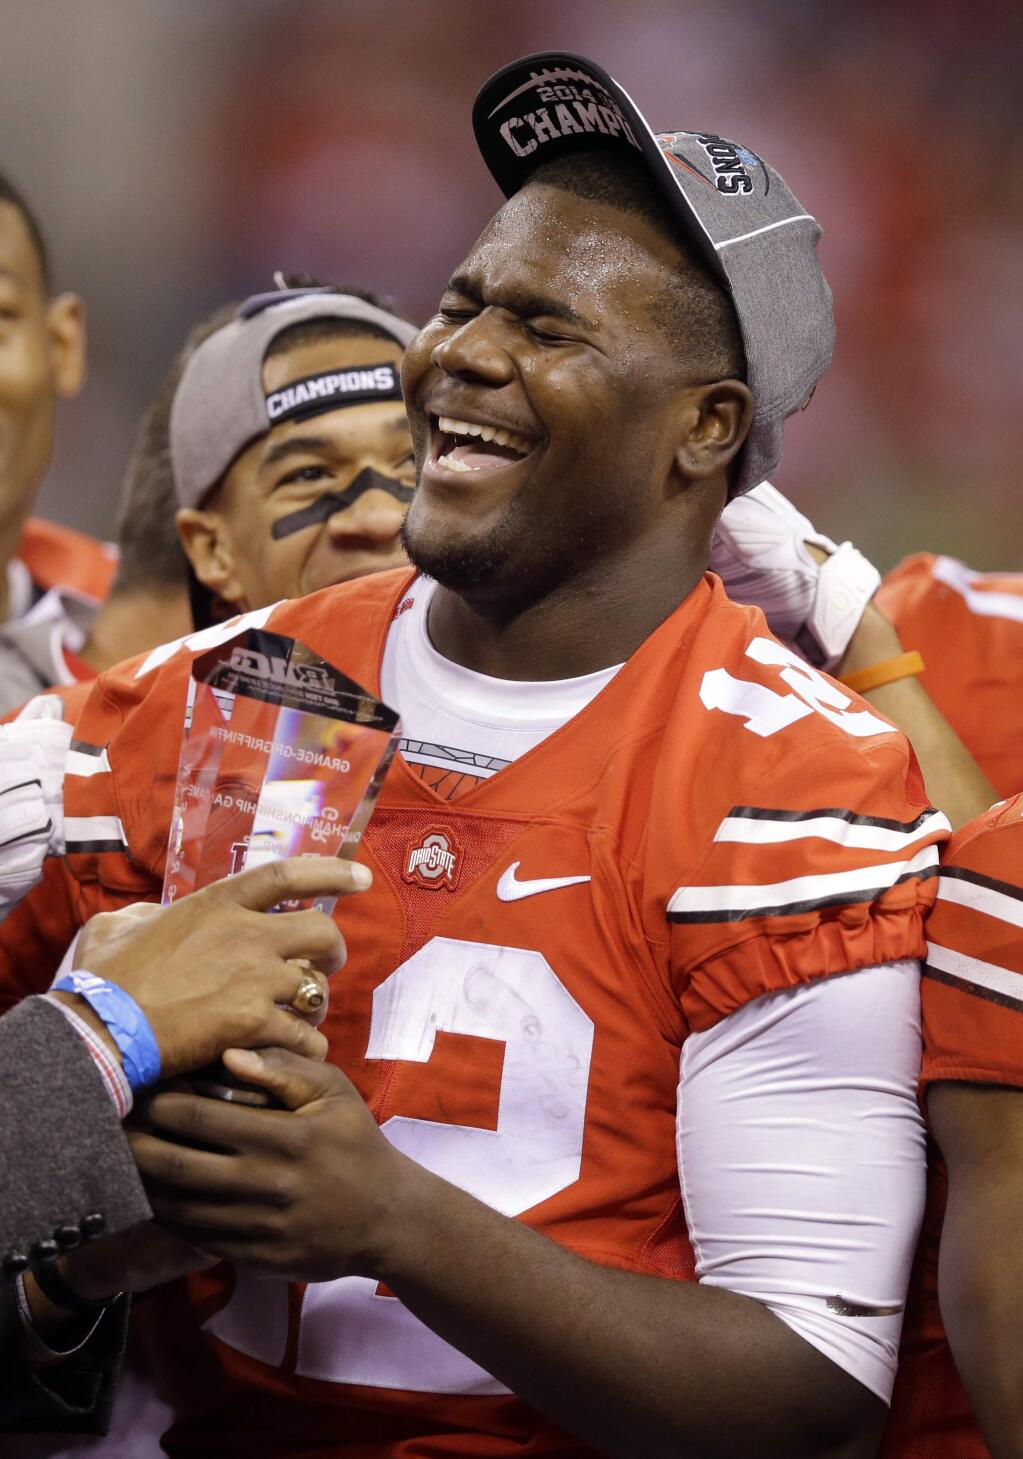 Ohio State quarterback Cardale Jones celebrates following the Big Ten Conference championship NCAA college football game after midnight Sunday, Dec. 7, 2014, in Indianapolis. Ohio State defeated Wisconsin 59-0. (AP Photo/Michael Conroy)